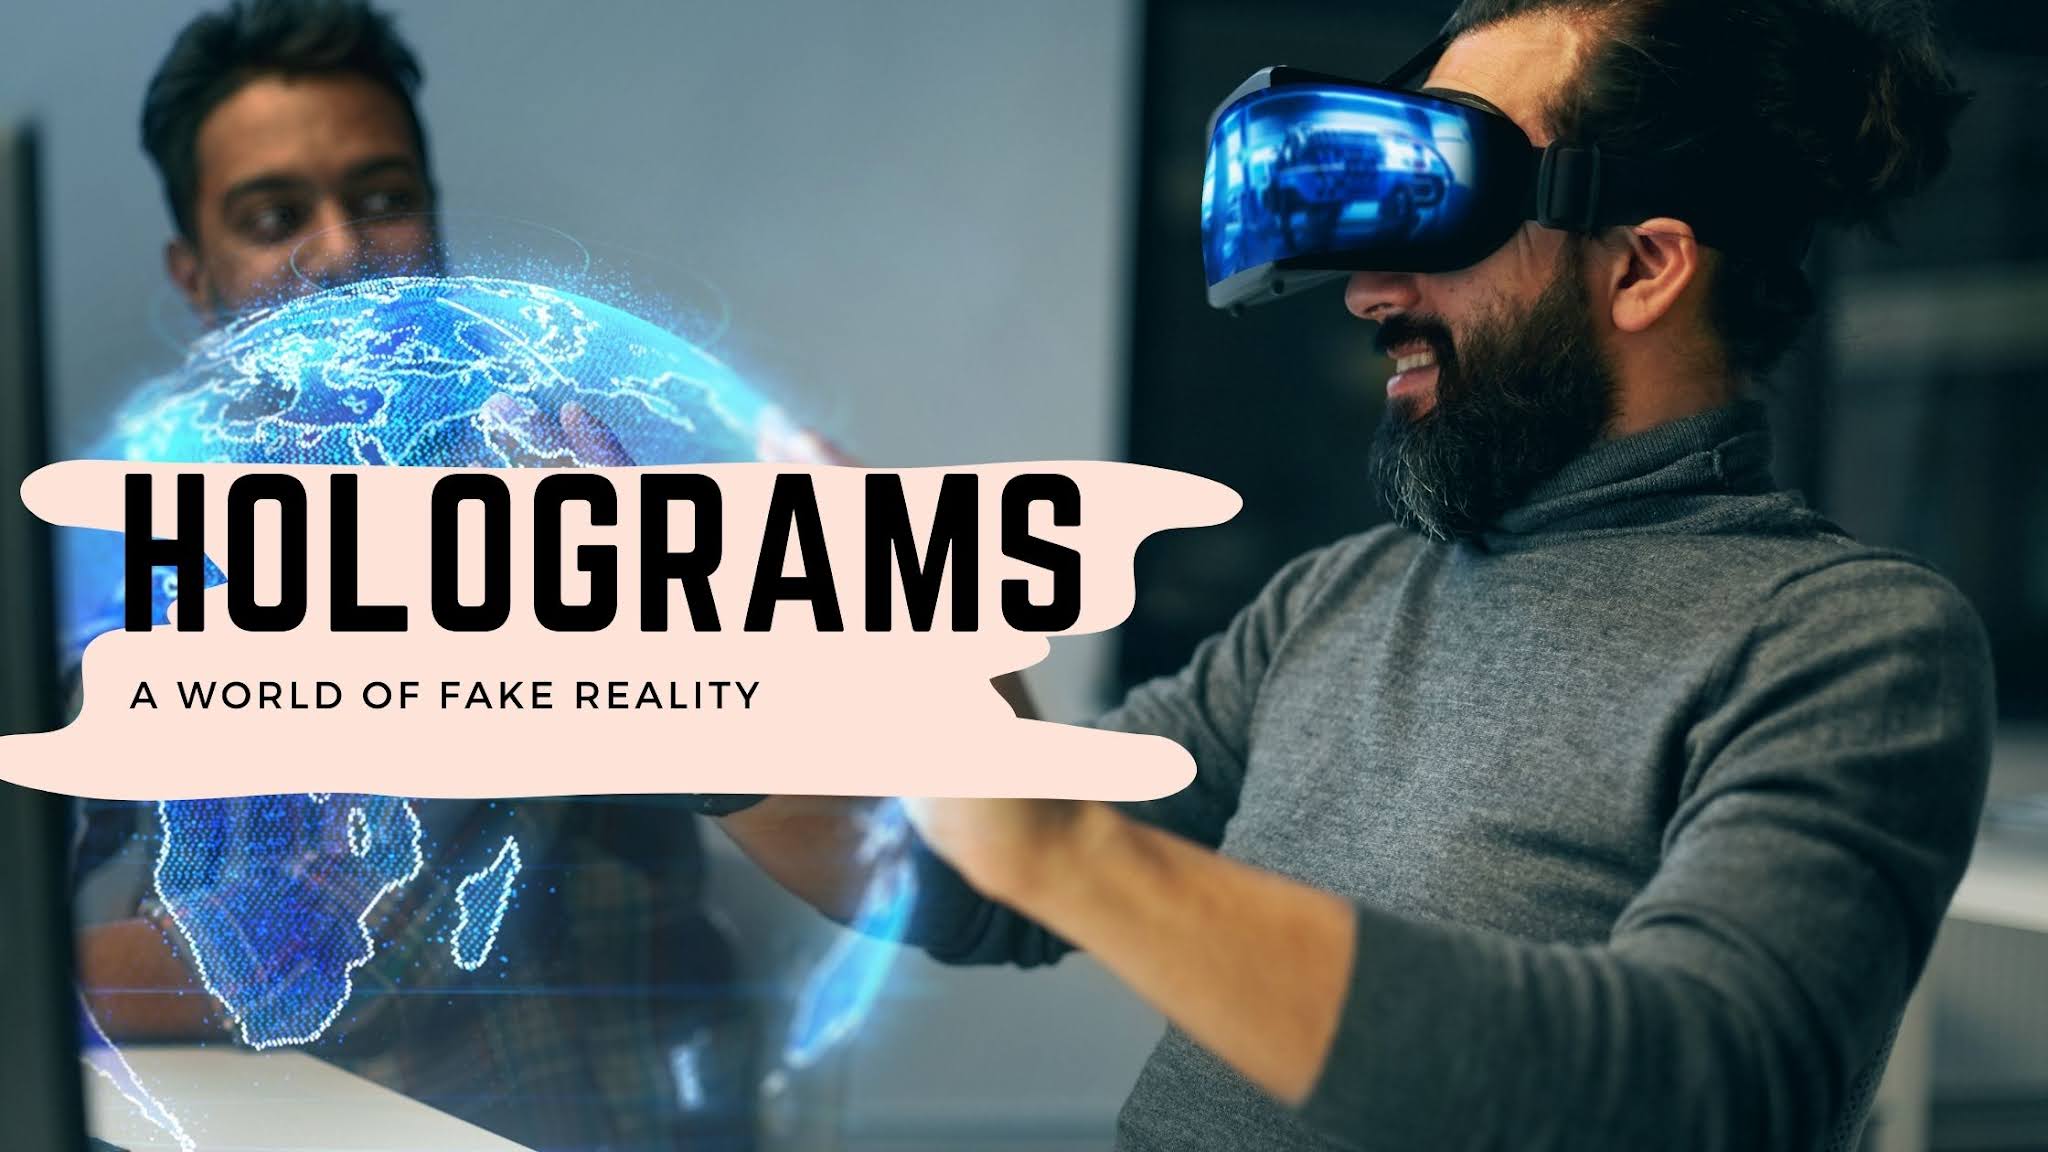 Holograms blog banner image with a background image of a bearded man wearing a VR machine and a man watching the former